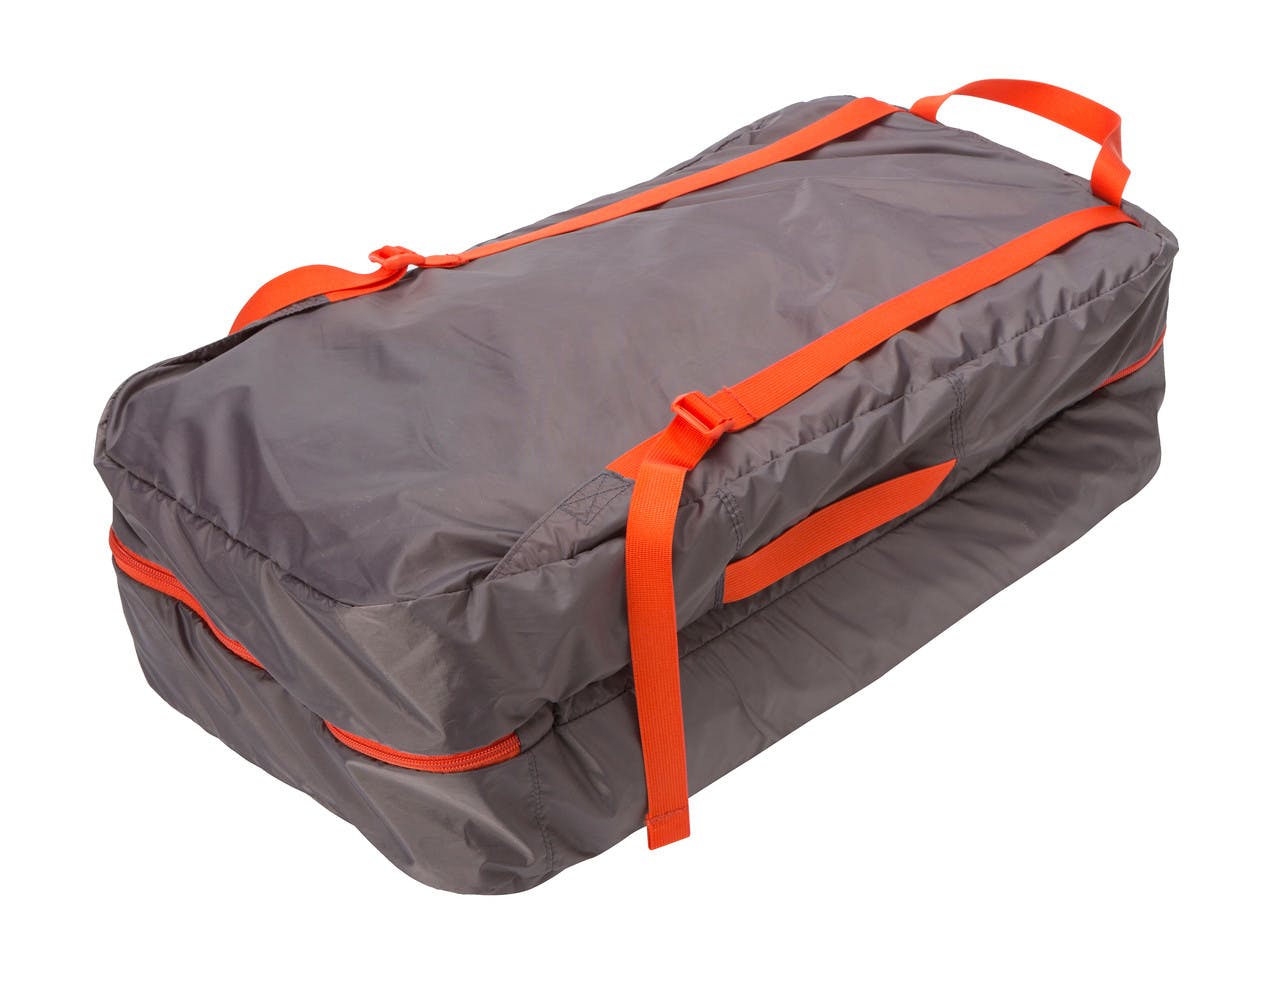 Big House 4-Person Tent Orange/Taupe